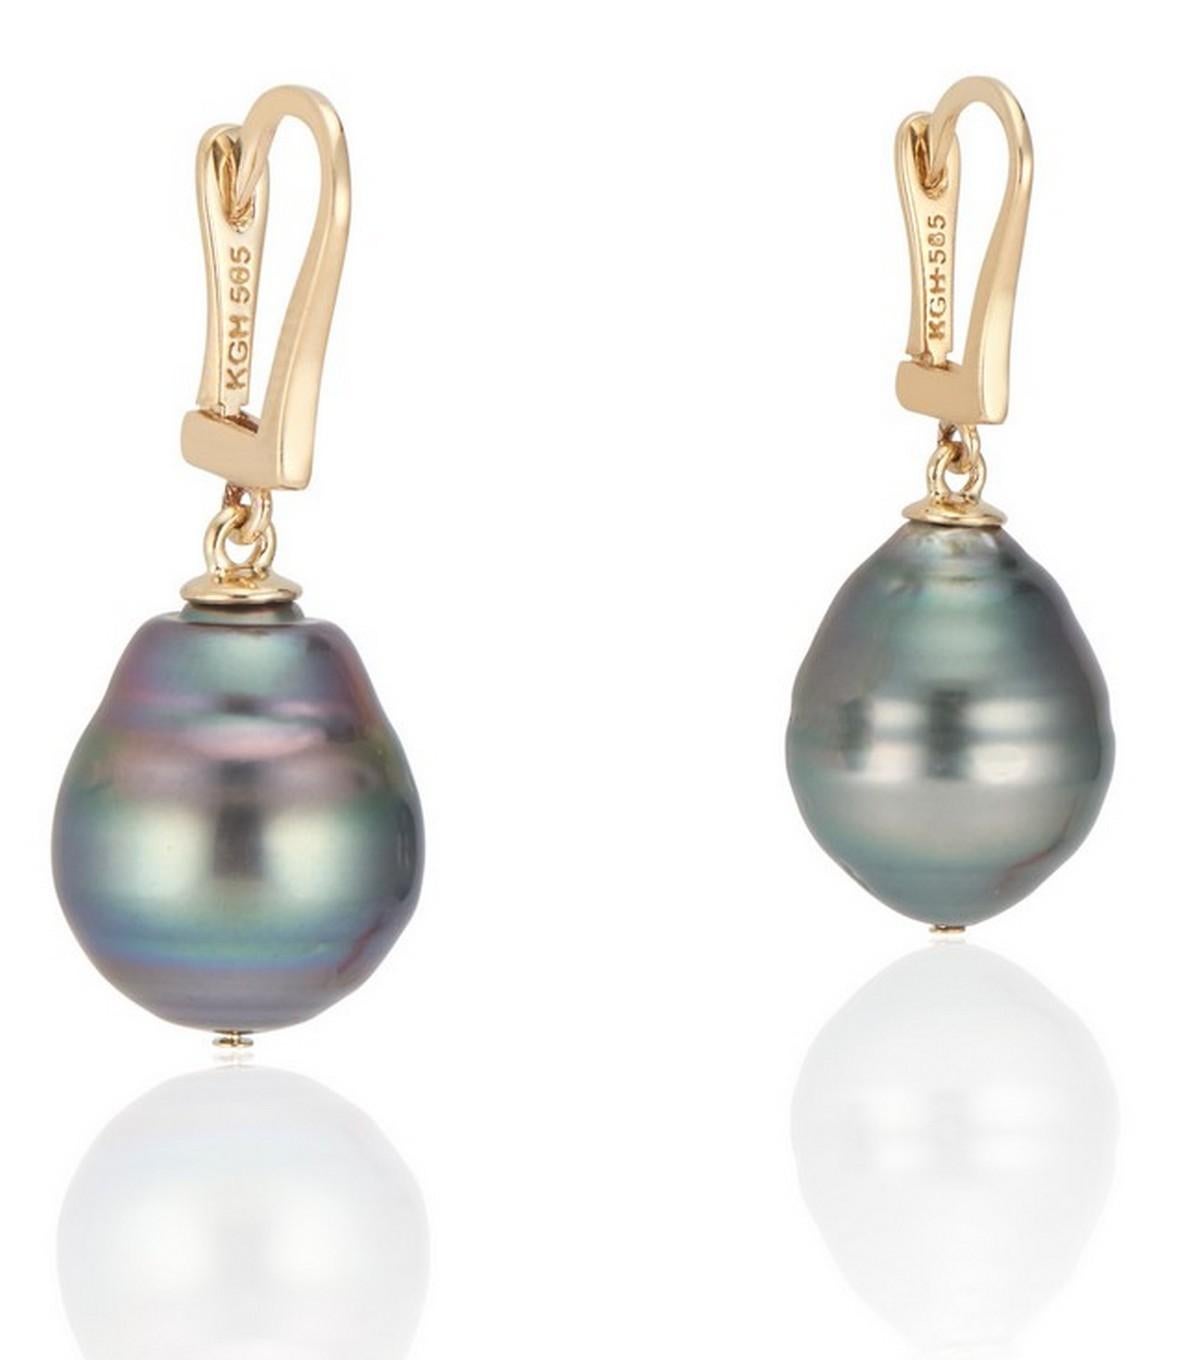 Enhance your daily attire with the subtle sophistication of our 14K Yellow Gold Baroque Pearl Drop Earrings. These elegant earrings pair a sleek, polished gold lever back with a singular, lustrous baroque pearl, introducing an element of luxury to